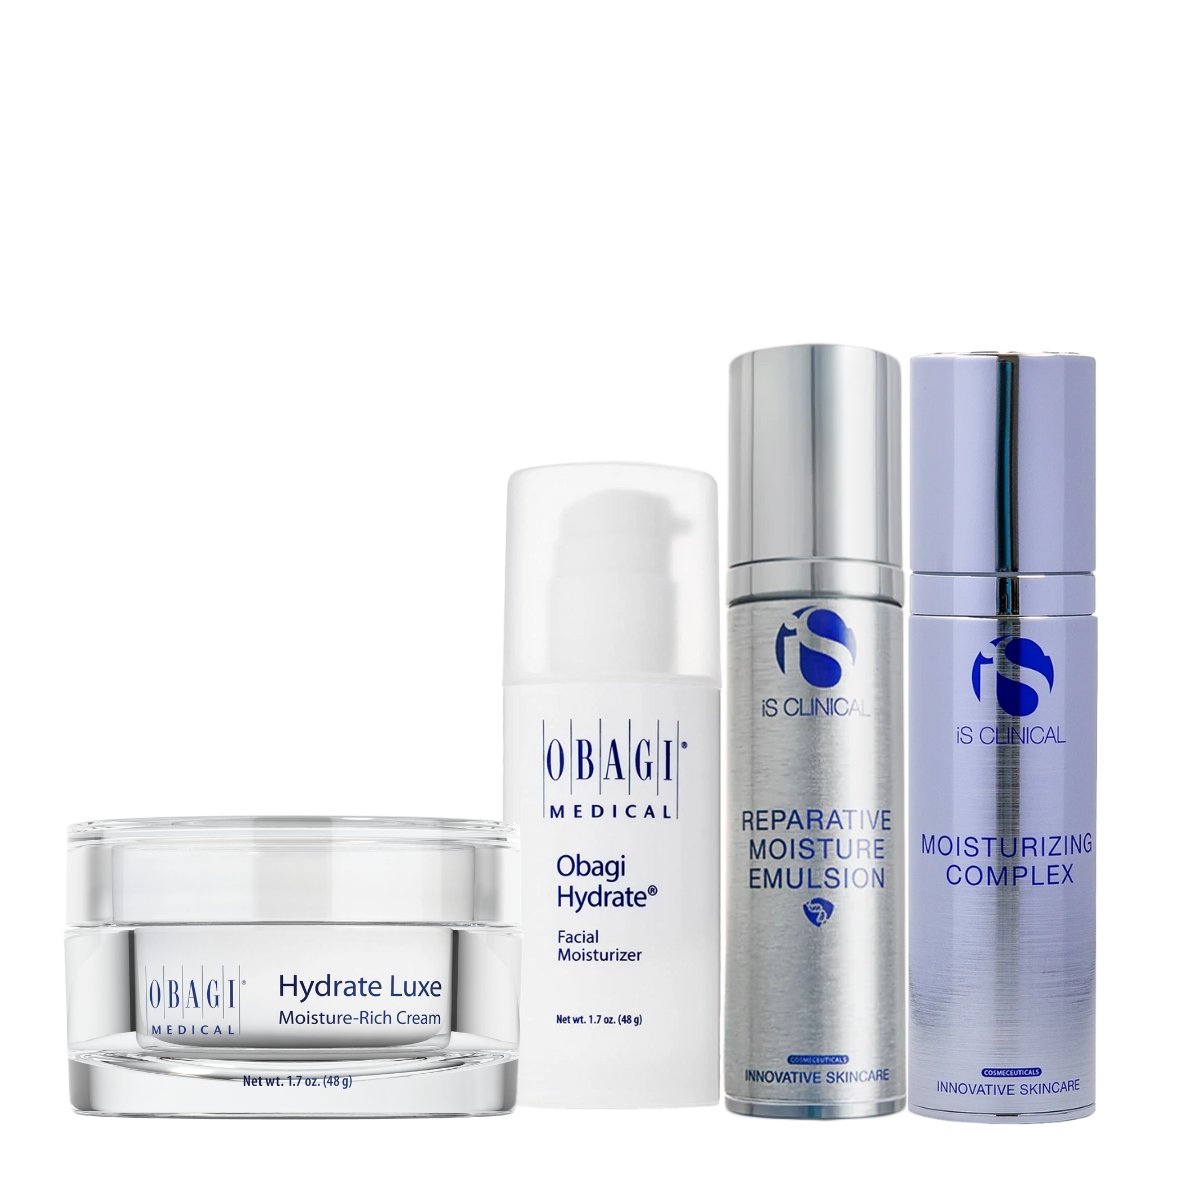 All About Hydration Bundle - SkincareEssentials